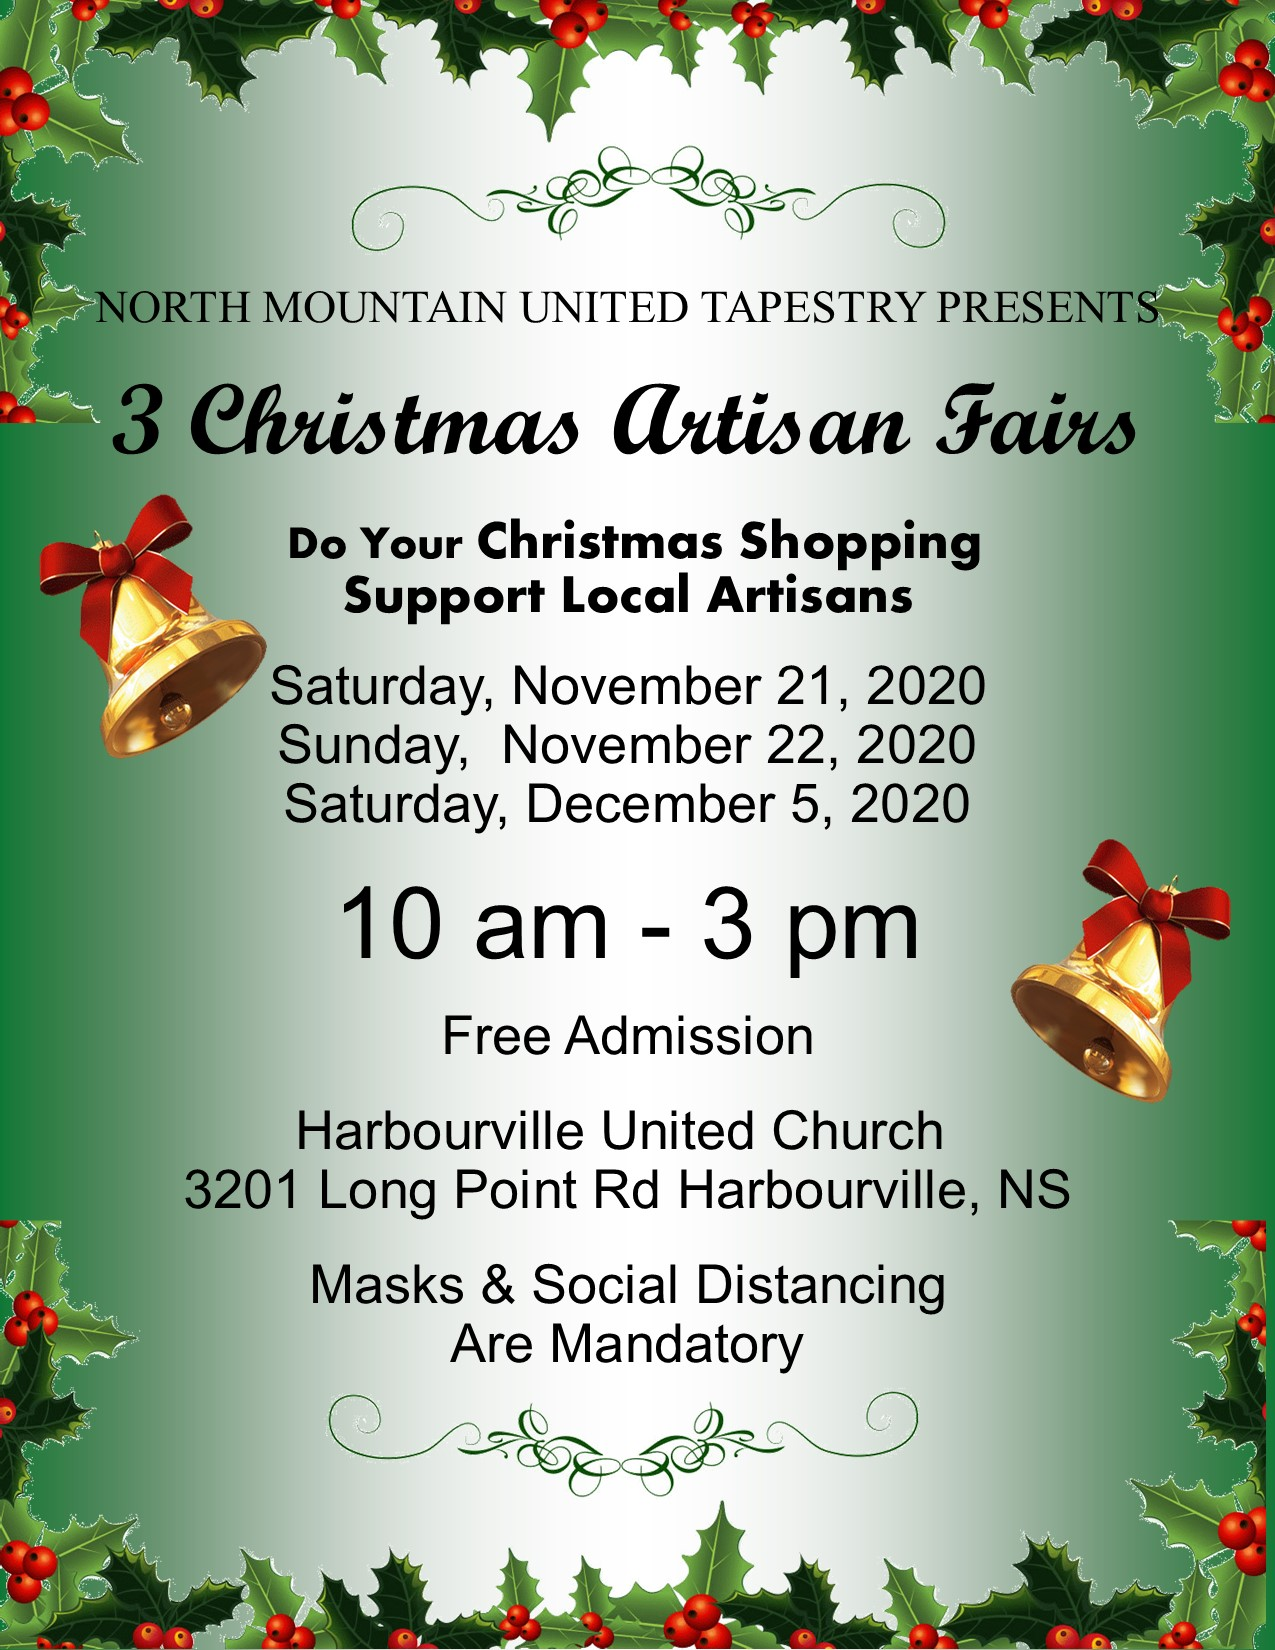 Christmas Artisan Fair at North Mountain United Tapestry, Harbourville ...